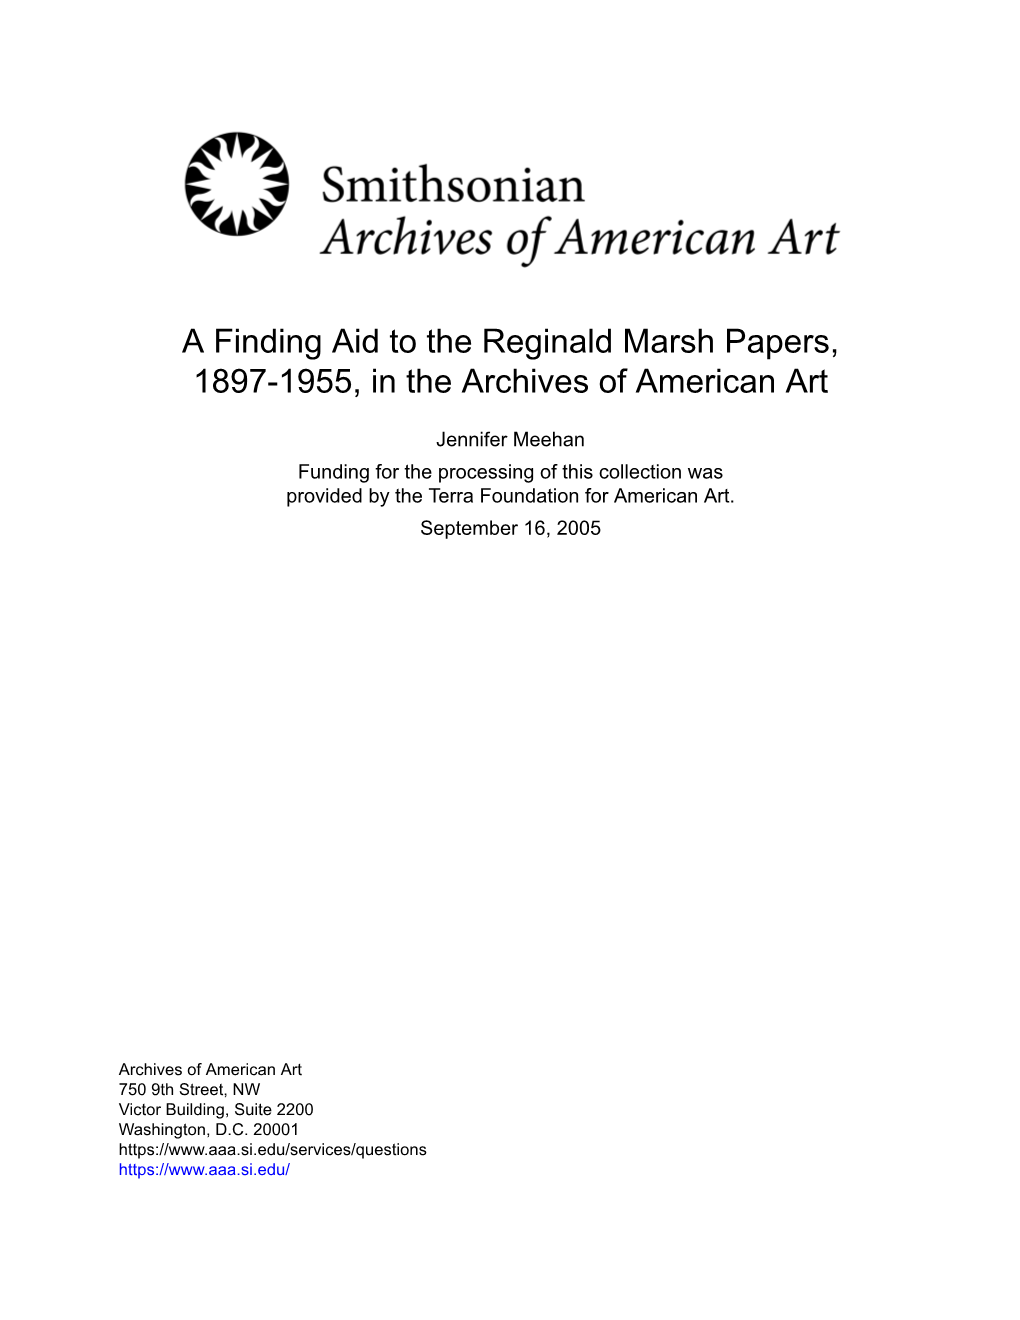 A Finding Aid to the Reginald Marsh Papers, 1897-1955, in the Archives of American Art